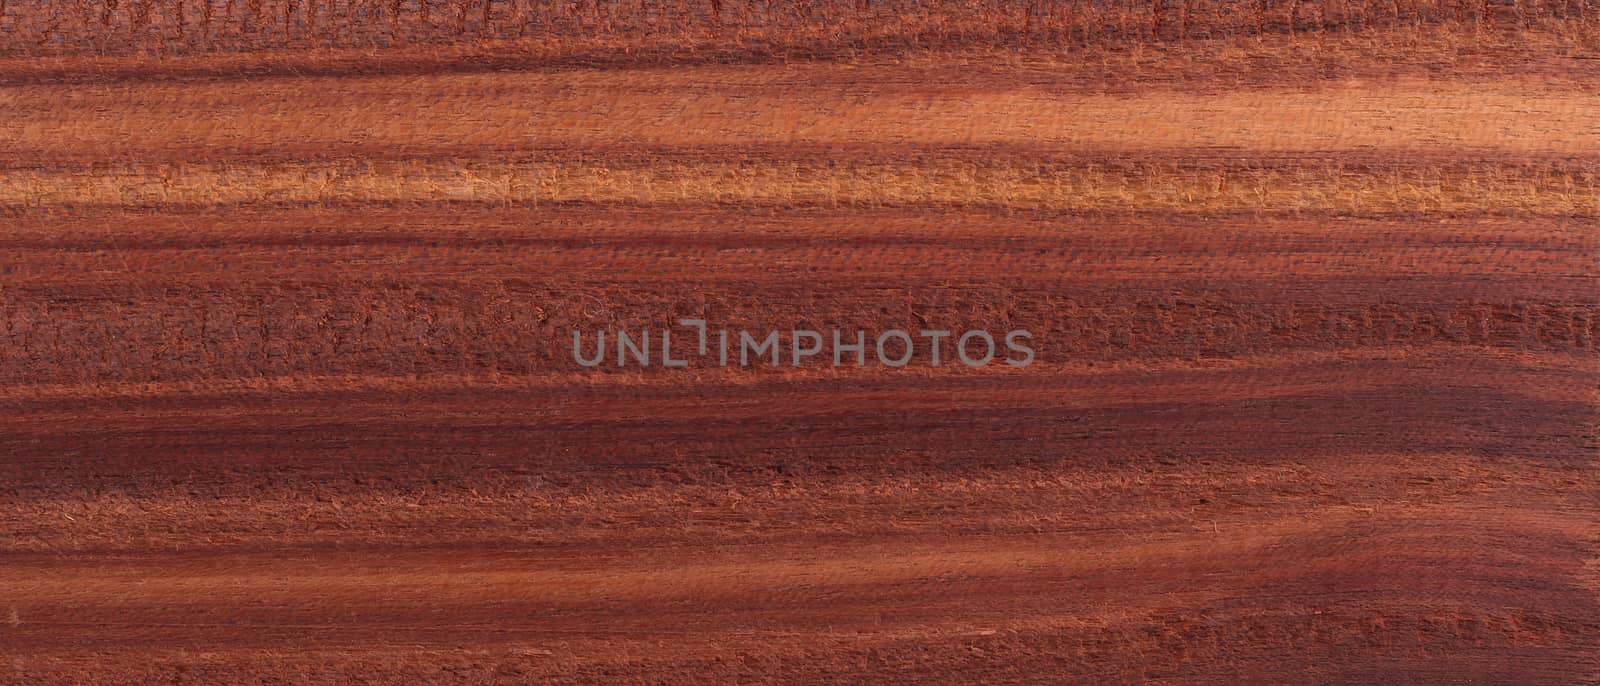 Wood from the tropical rainforest - Suriname - Brosimum paraense by michaklootwijk